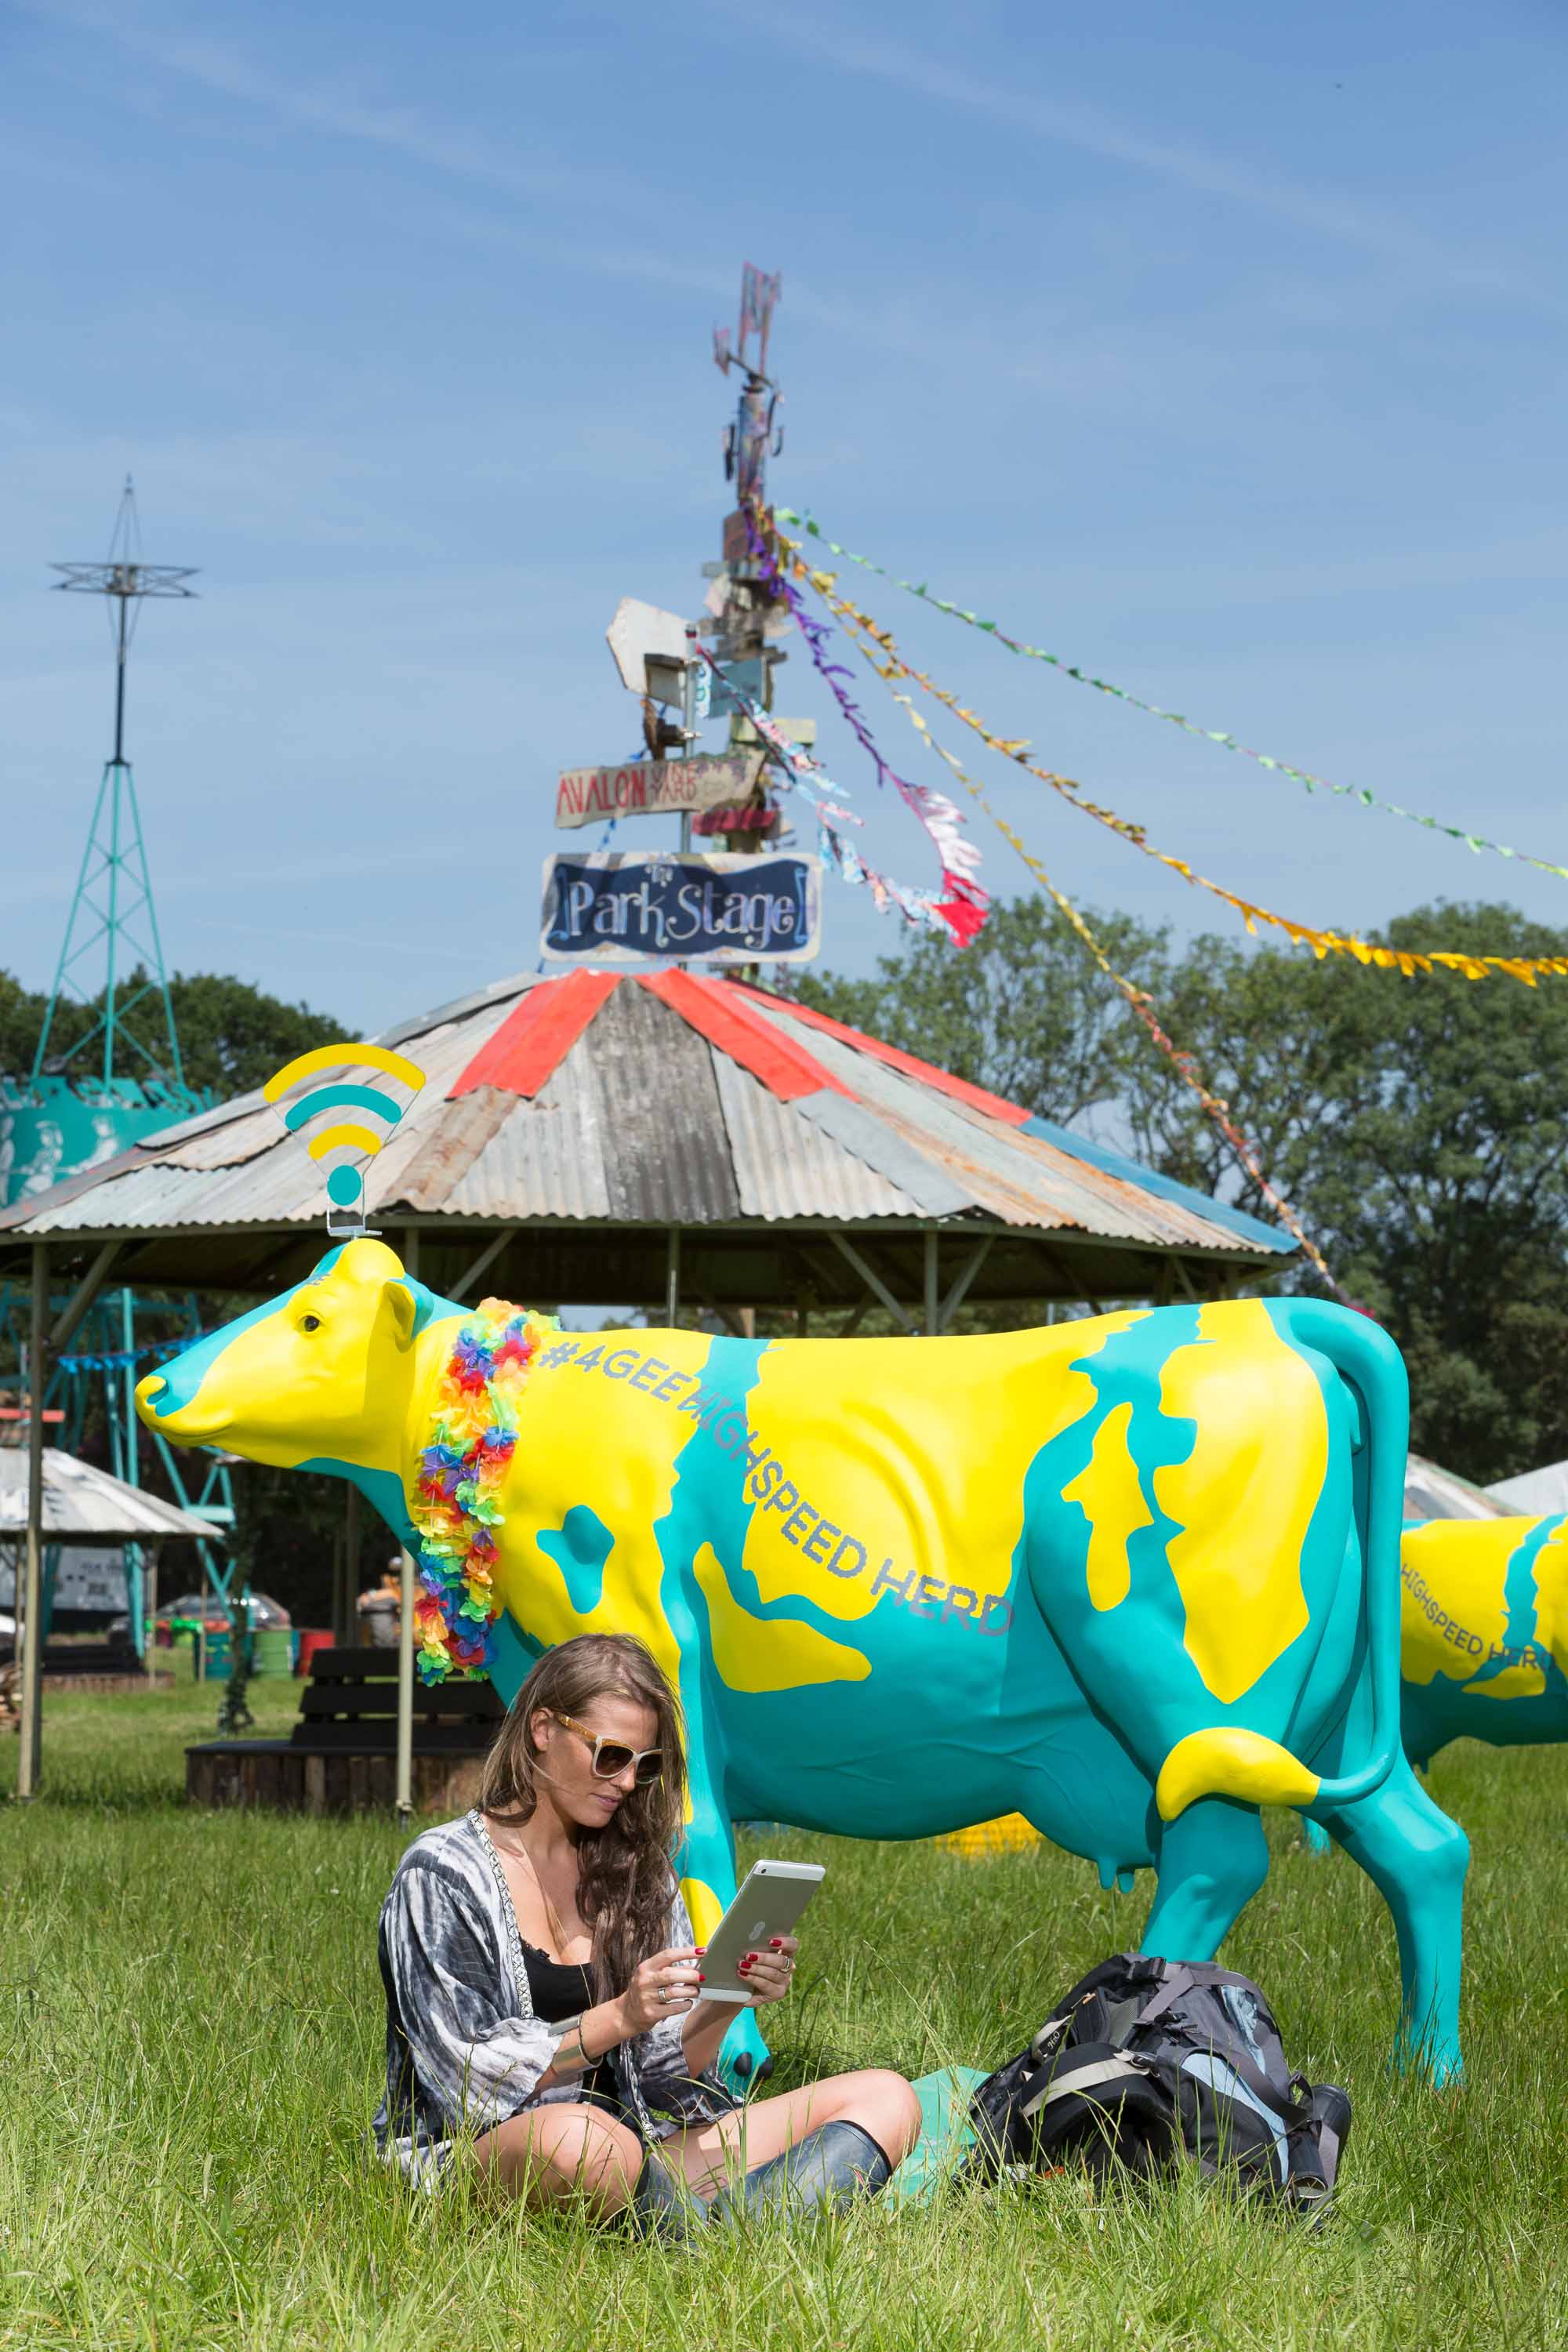 EE Provides Glastonbury With 'Highspeed Herd' for 2014 Festival